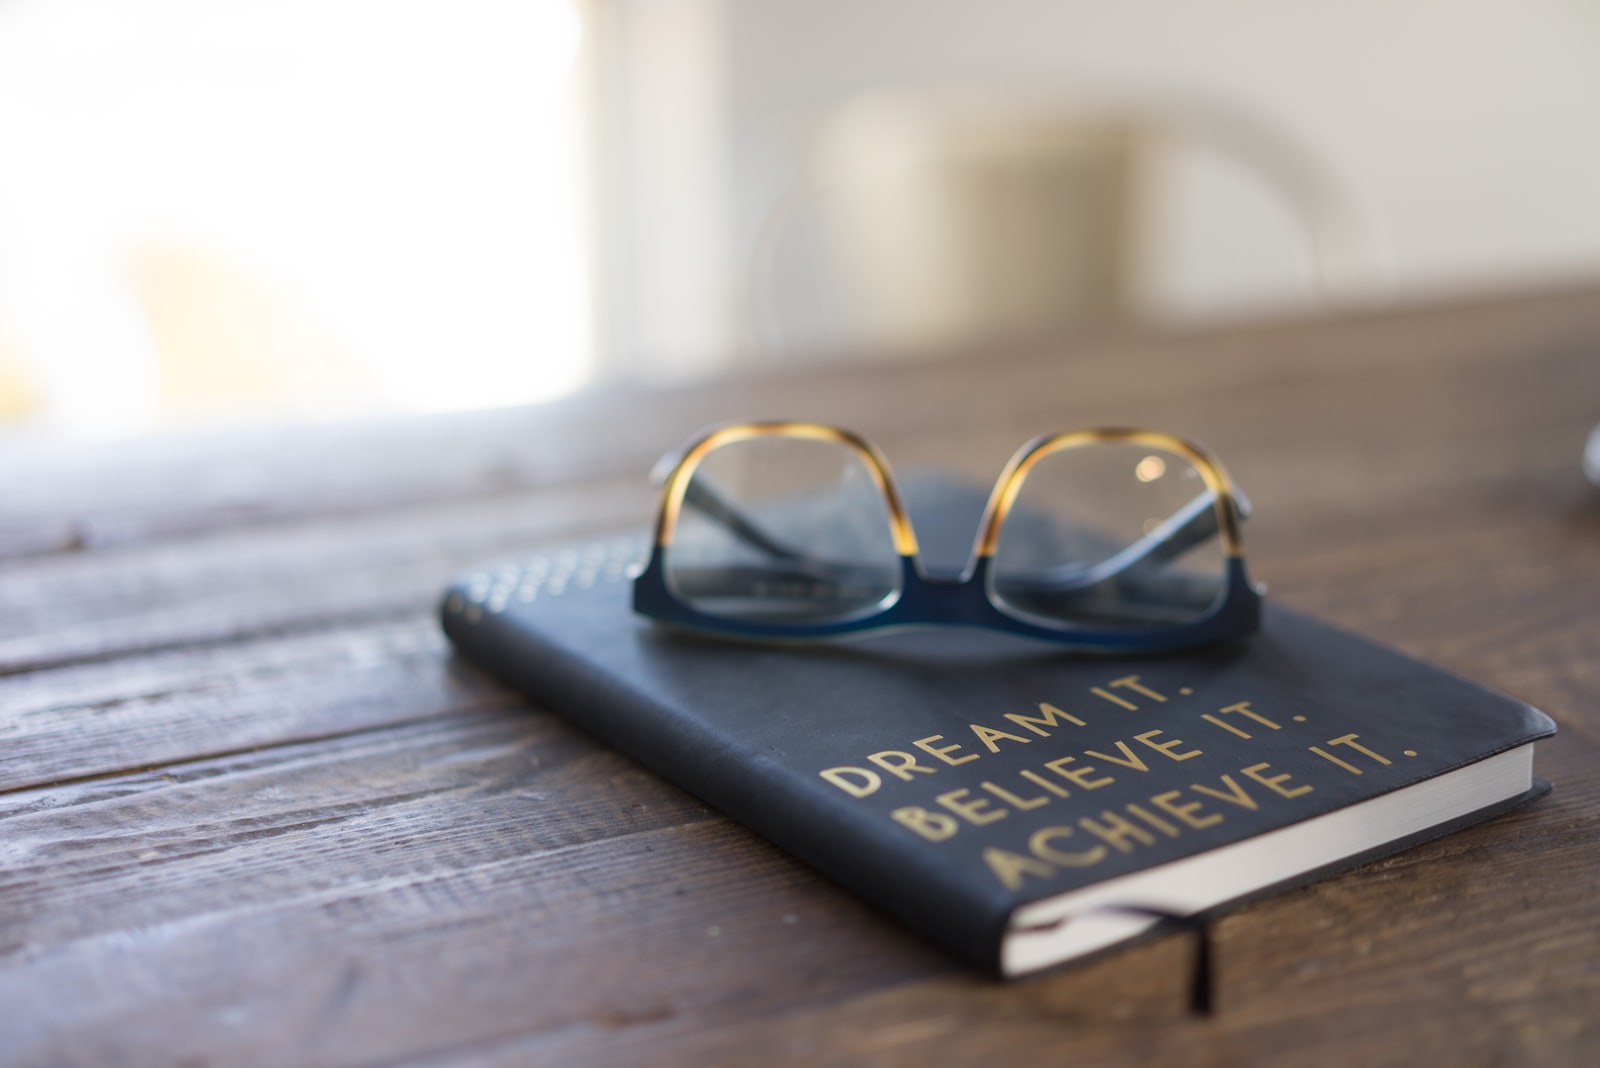 Black and brown eyeglasses on a book on a wooden table